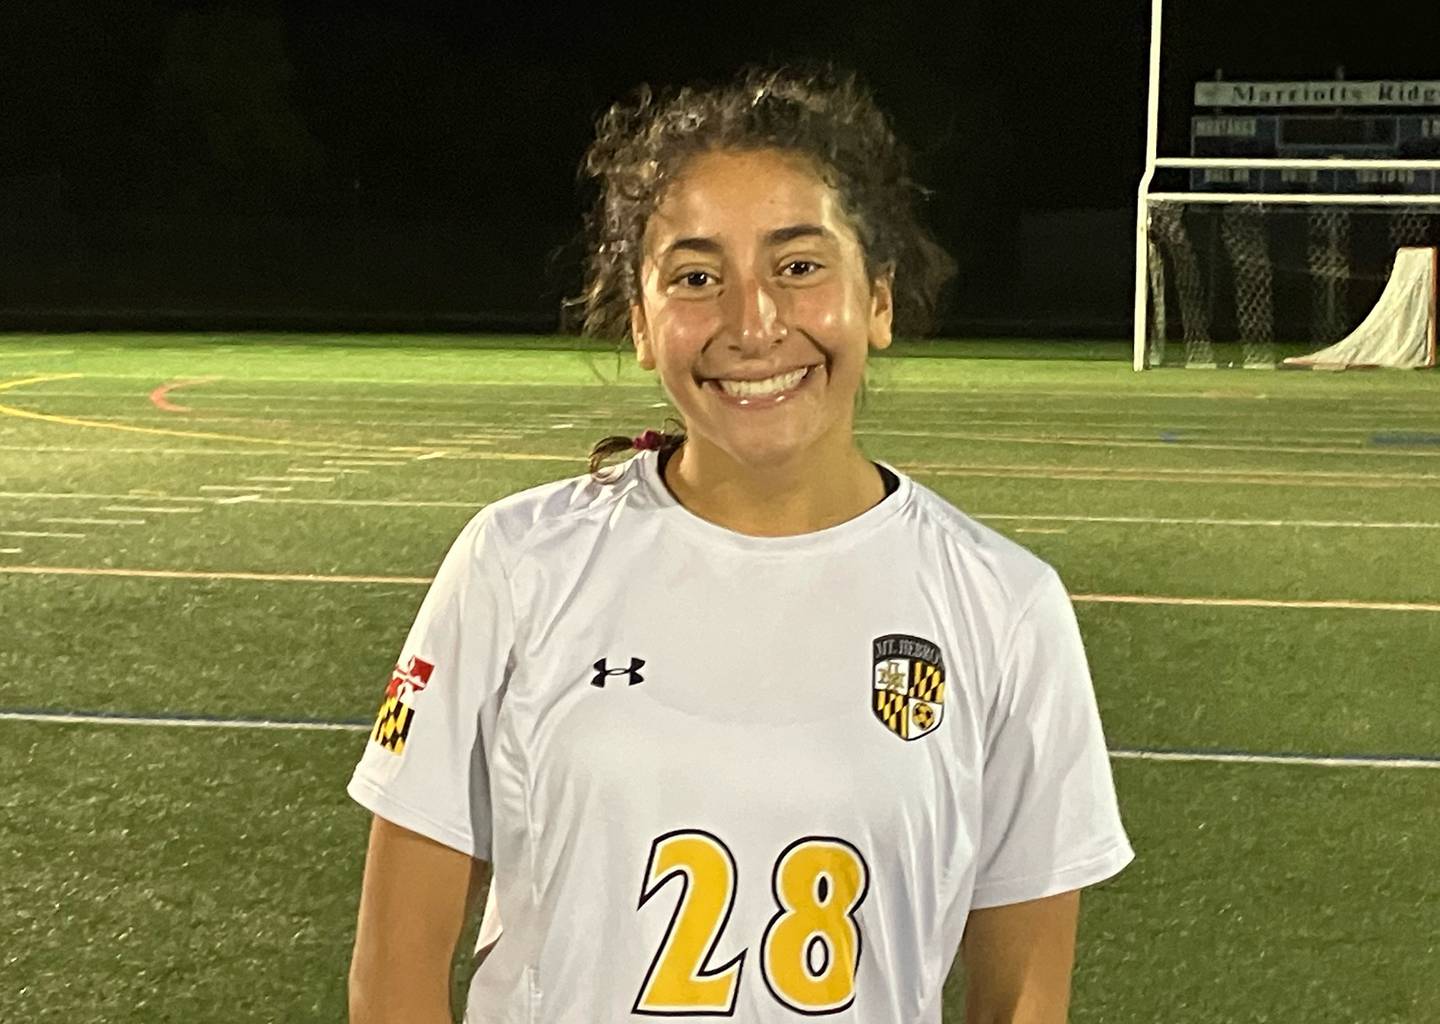 Mount Hebron junior forward Leen Jawhar scored both goals in No. 3 Mount Hebron’s 2-1 victory over previously unbeaten and seventh-ranked Marriotts Ridge on Tuesday night.